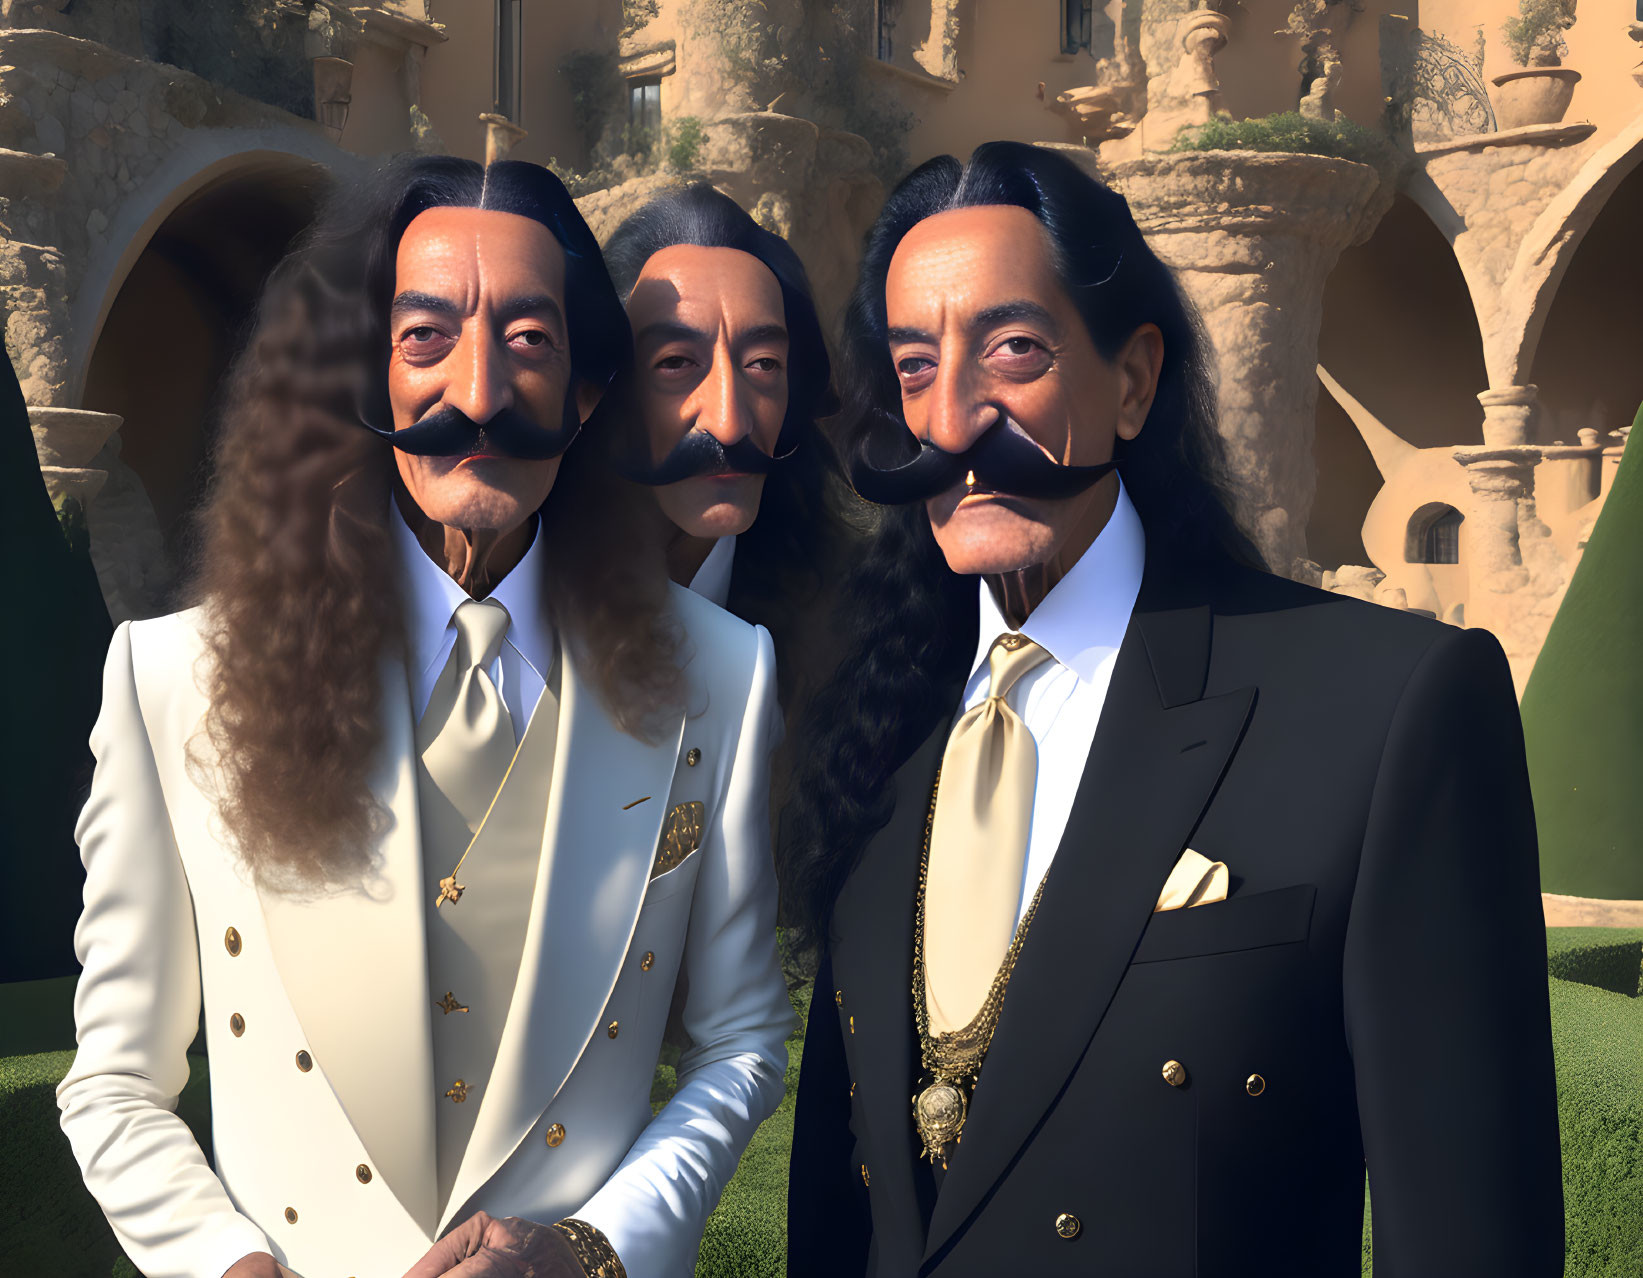 The Dali Brothers 9